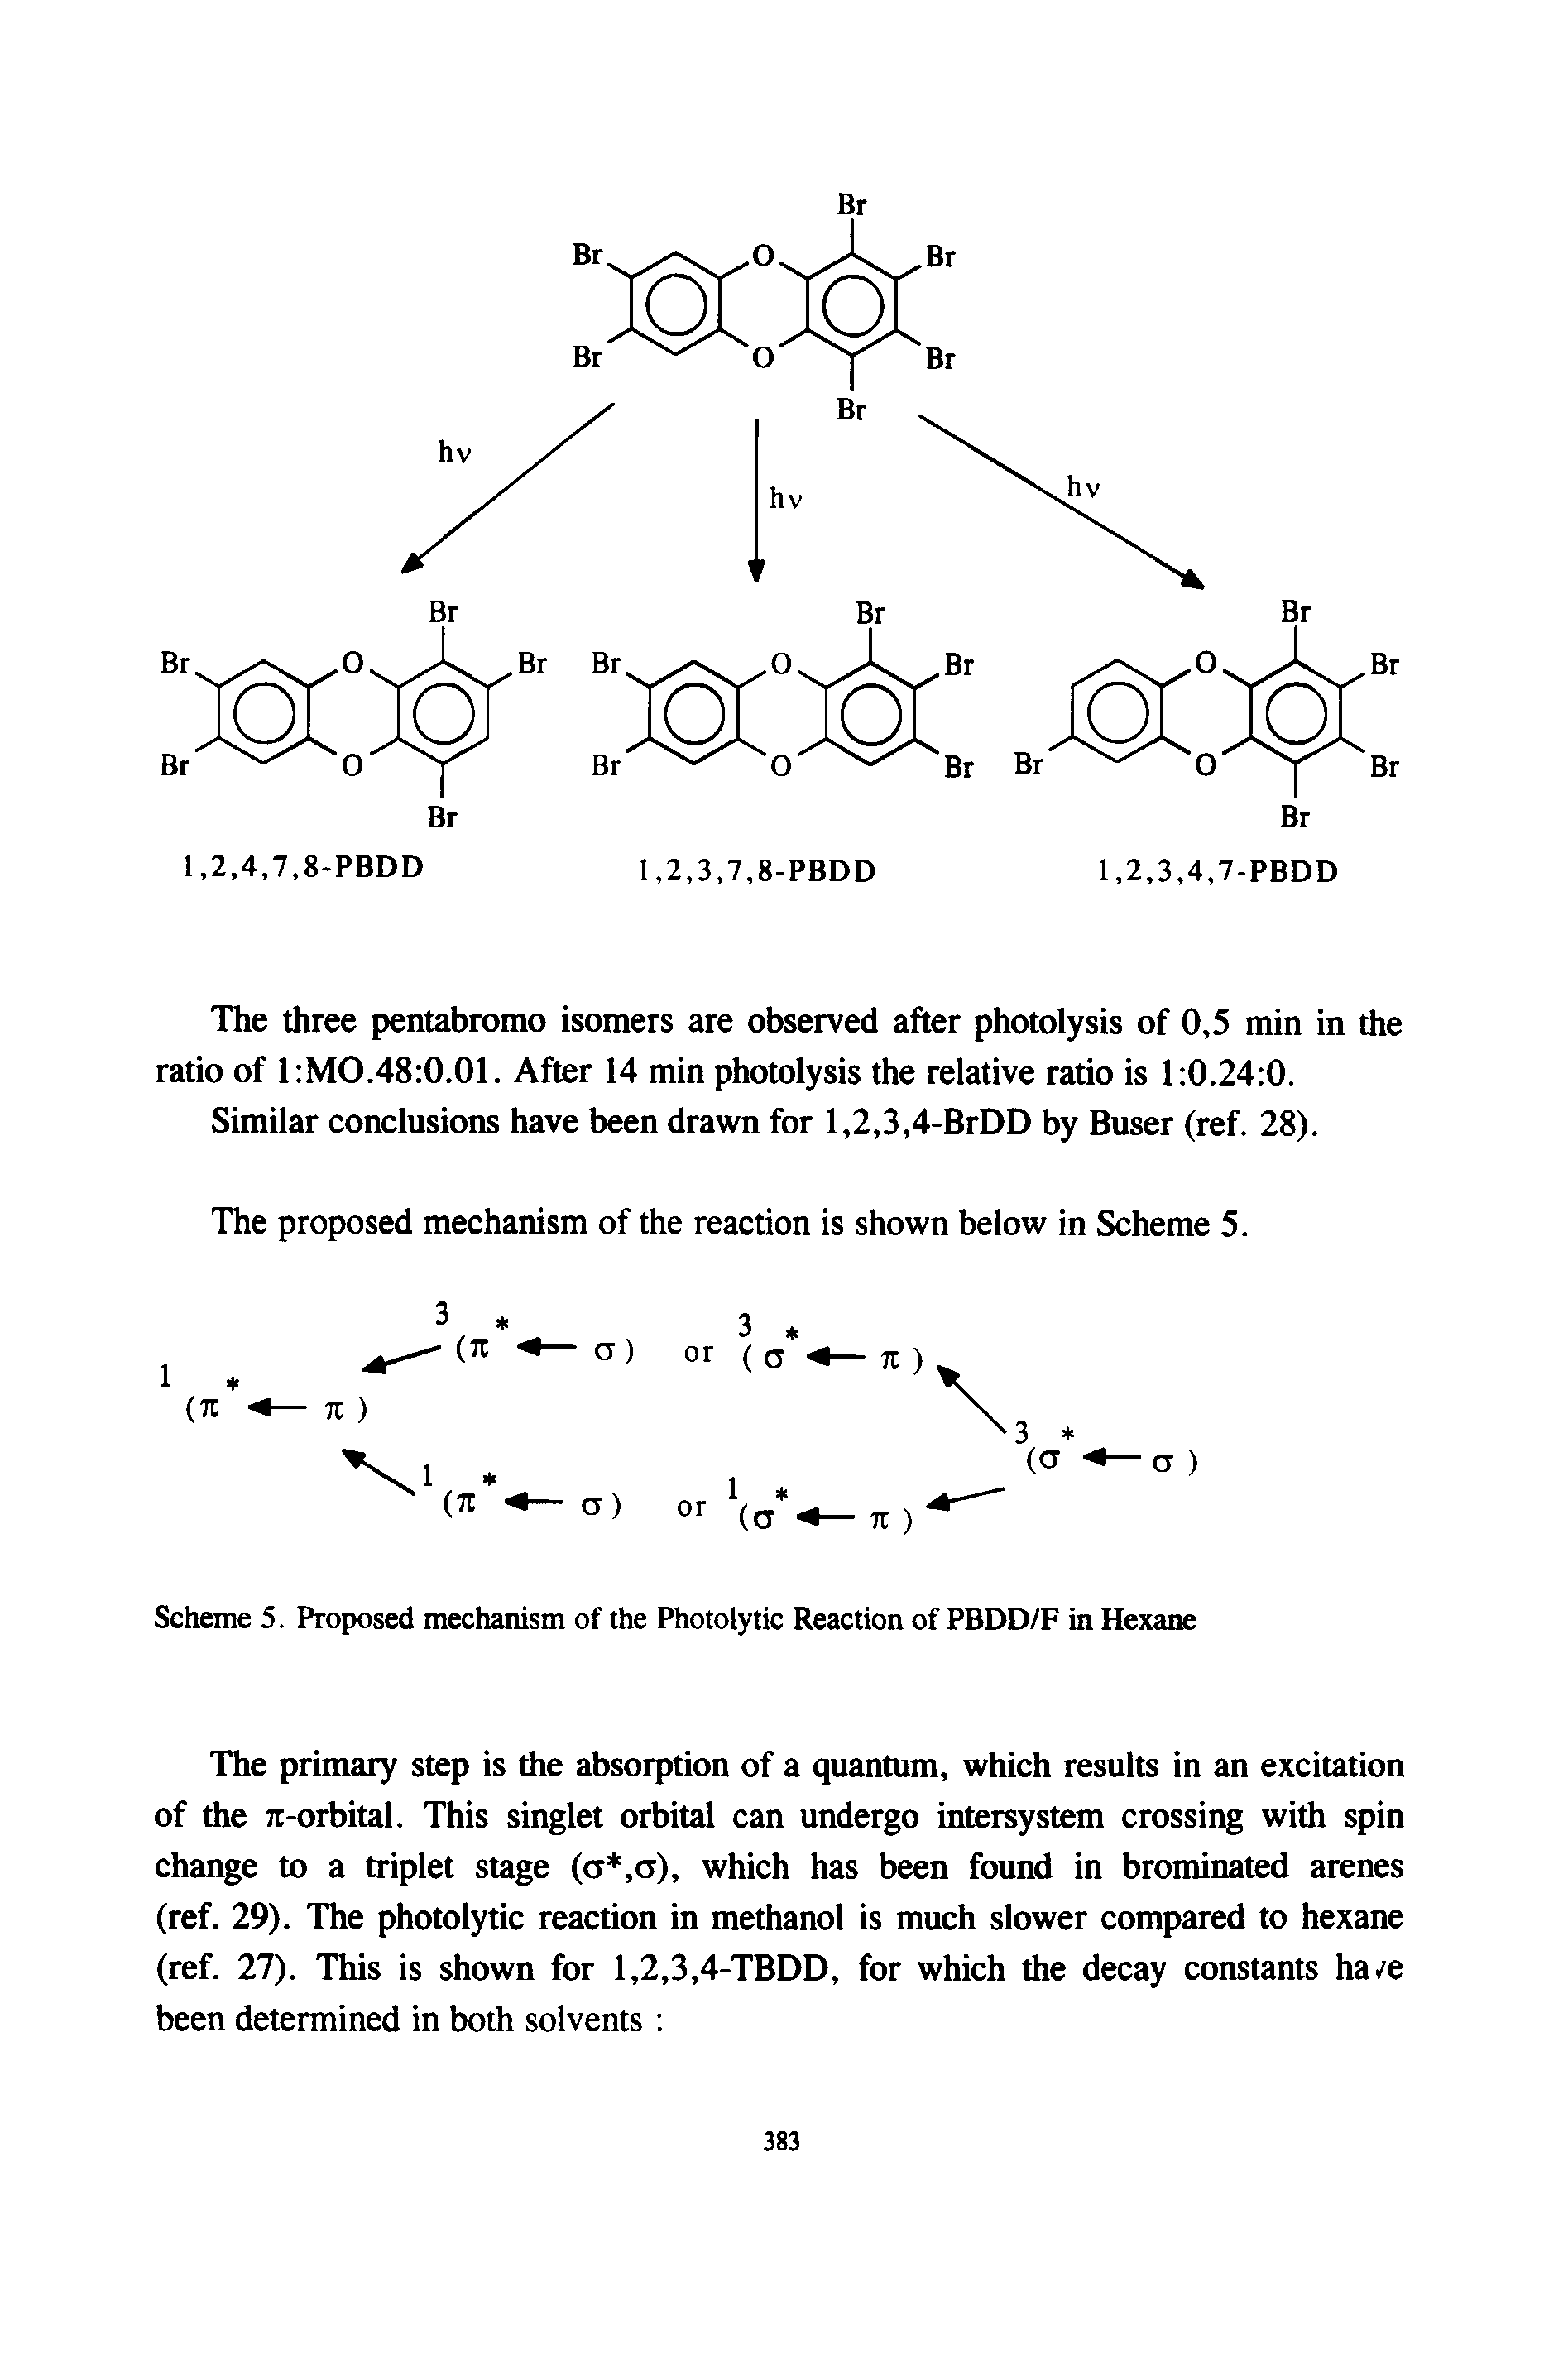 Scheme 5. Proposed mechanism of the Photolytic Reaction of PBDD/F in Hexane...